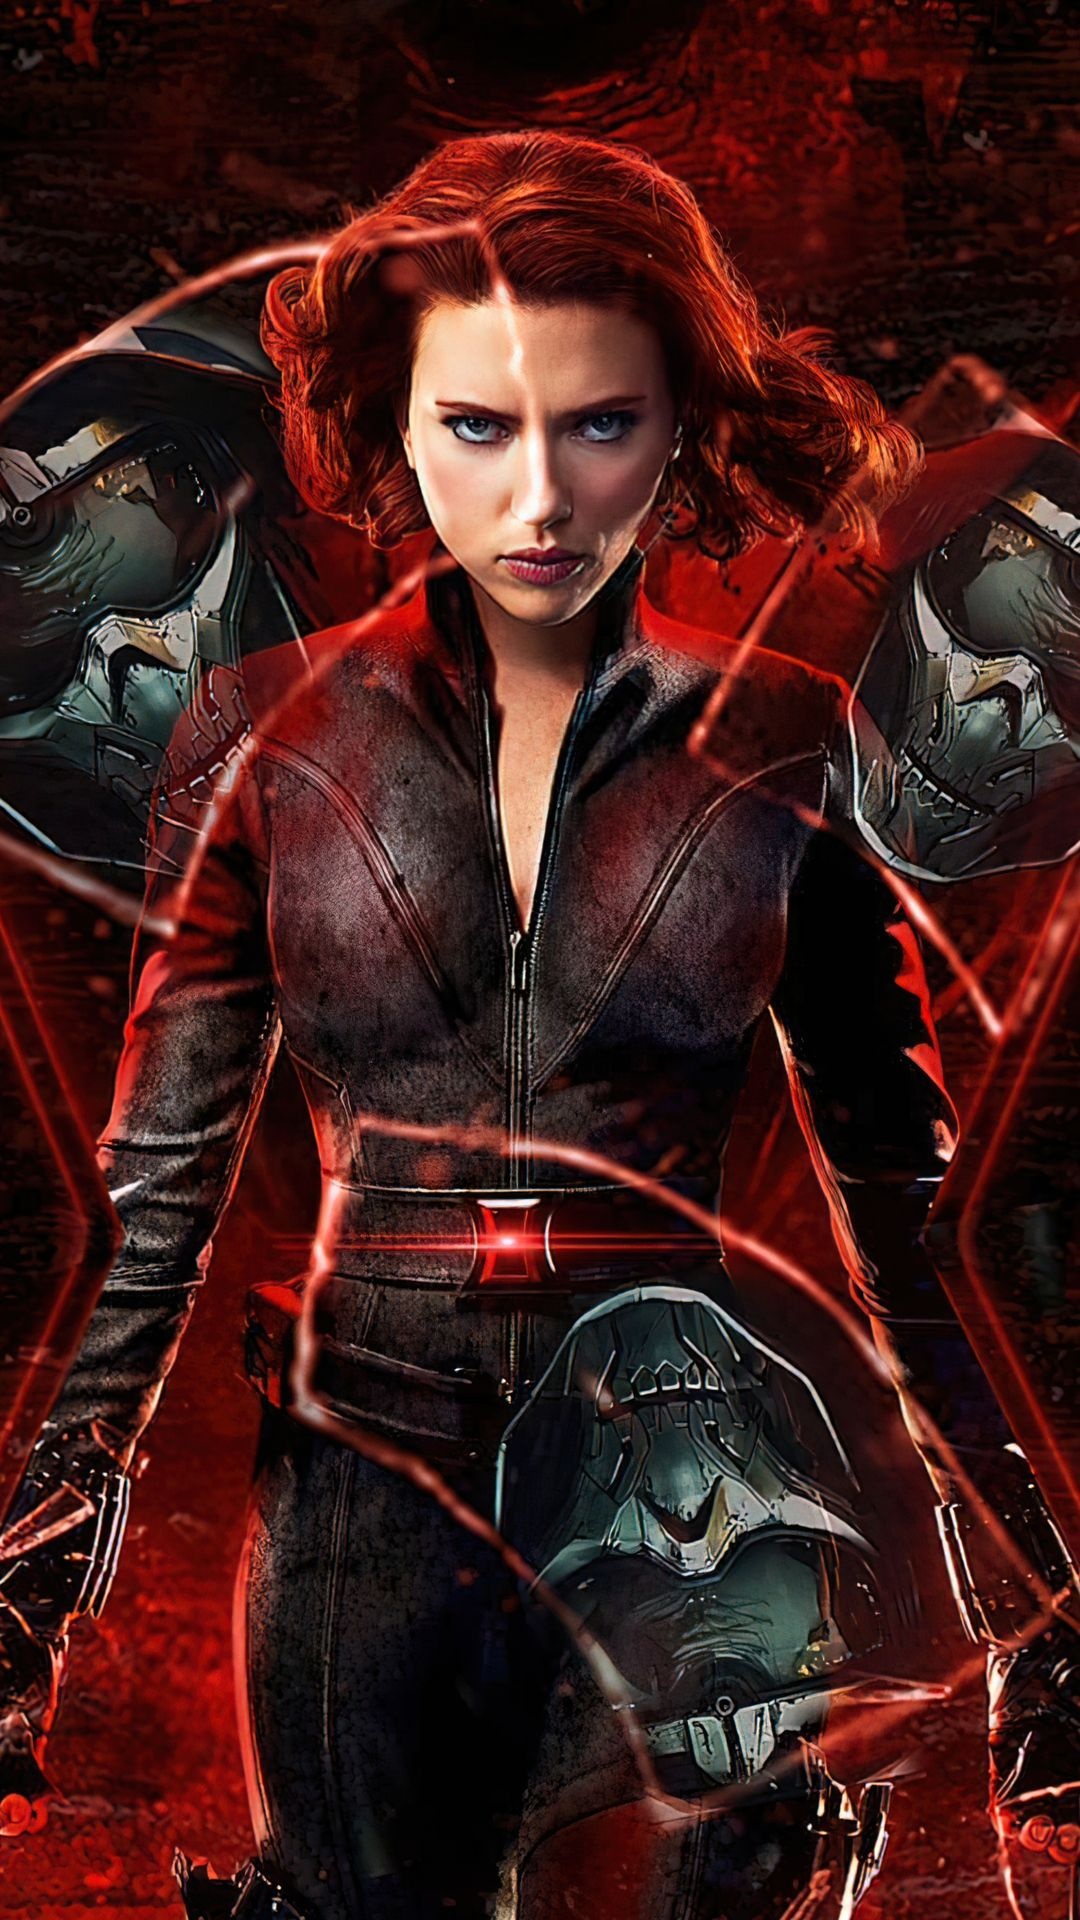 Black Widow wallpapers, High-quality images, Captivating visuals, Download now, 1080x1920 Full HD Phone